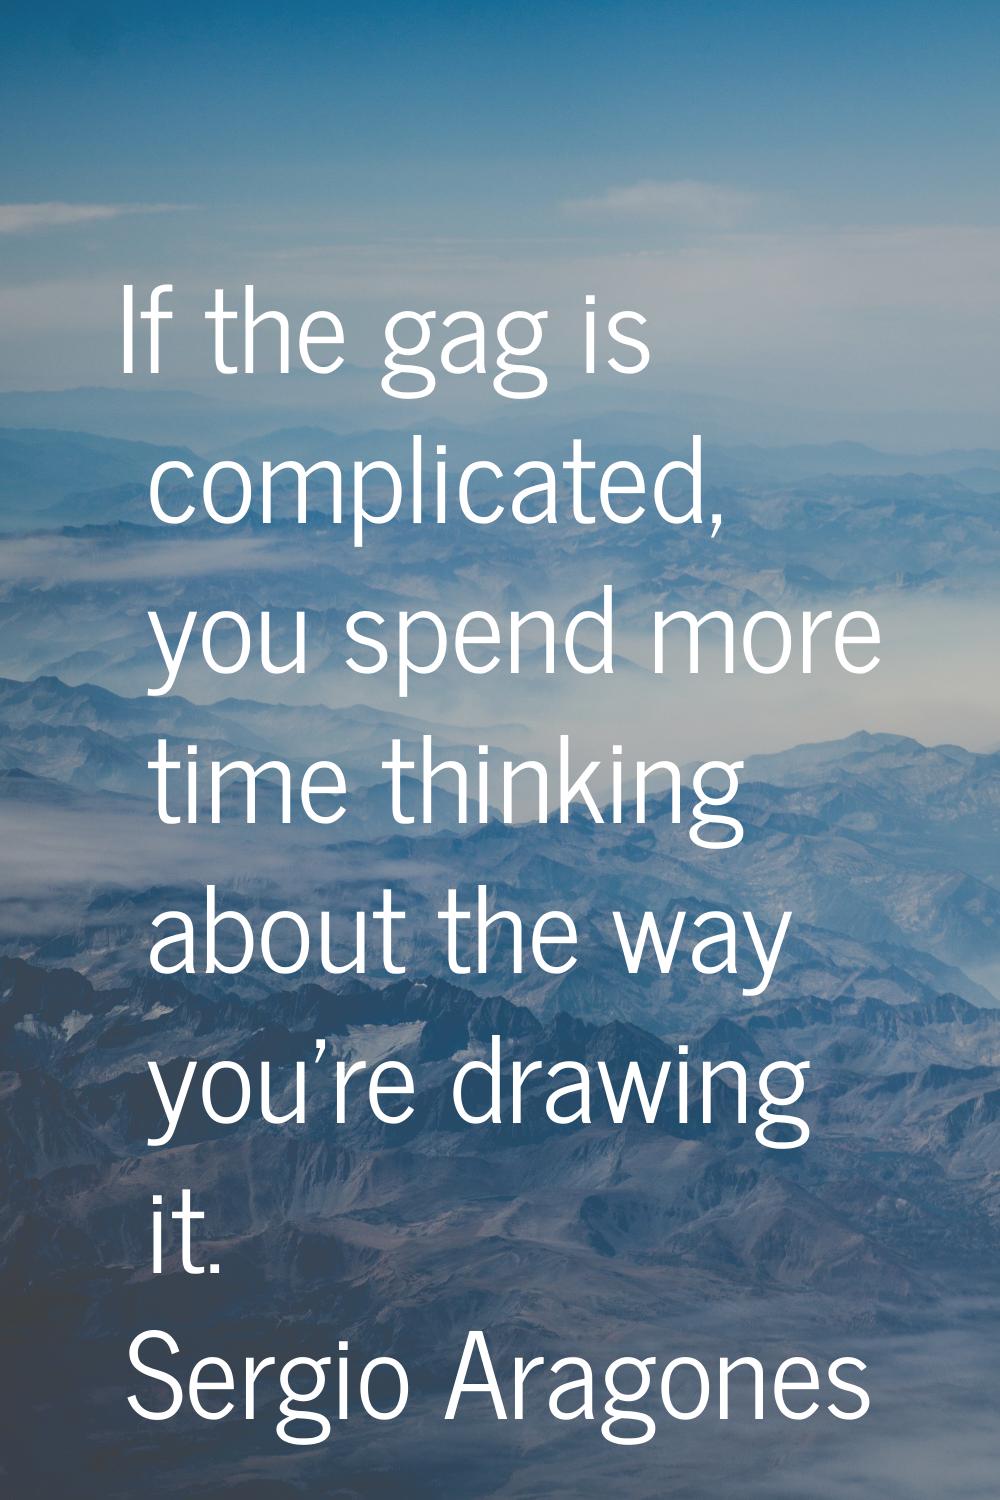 If the gag is complicated, you spend more time thinking about the way you're drawing it.